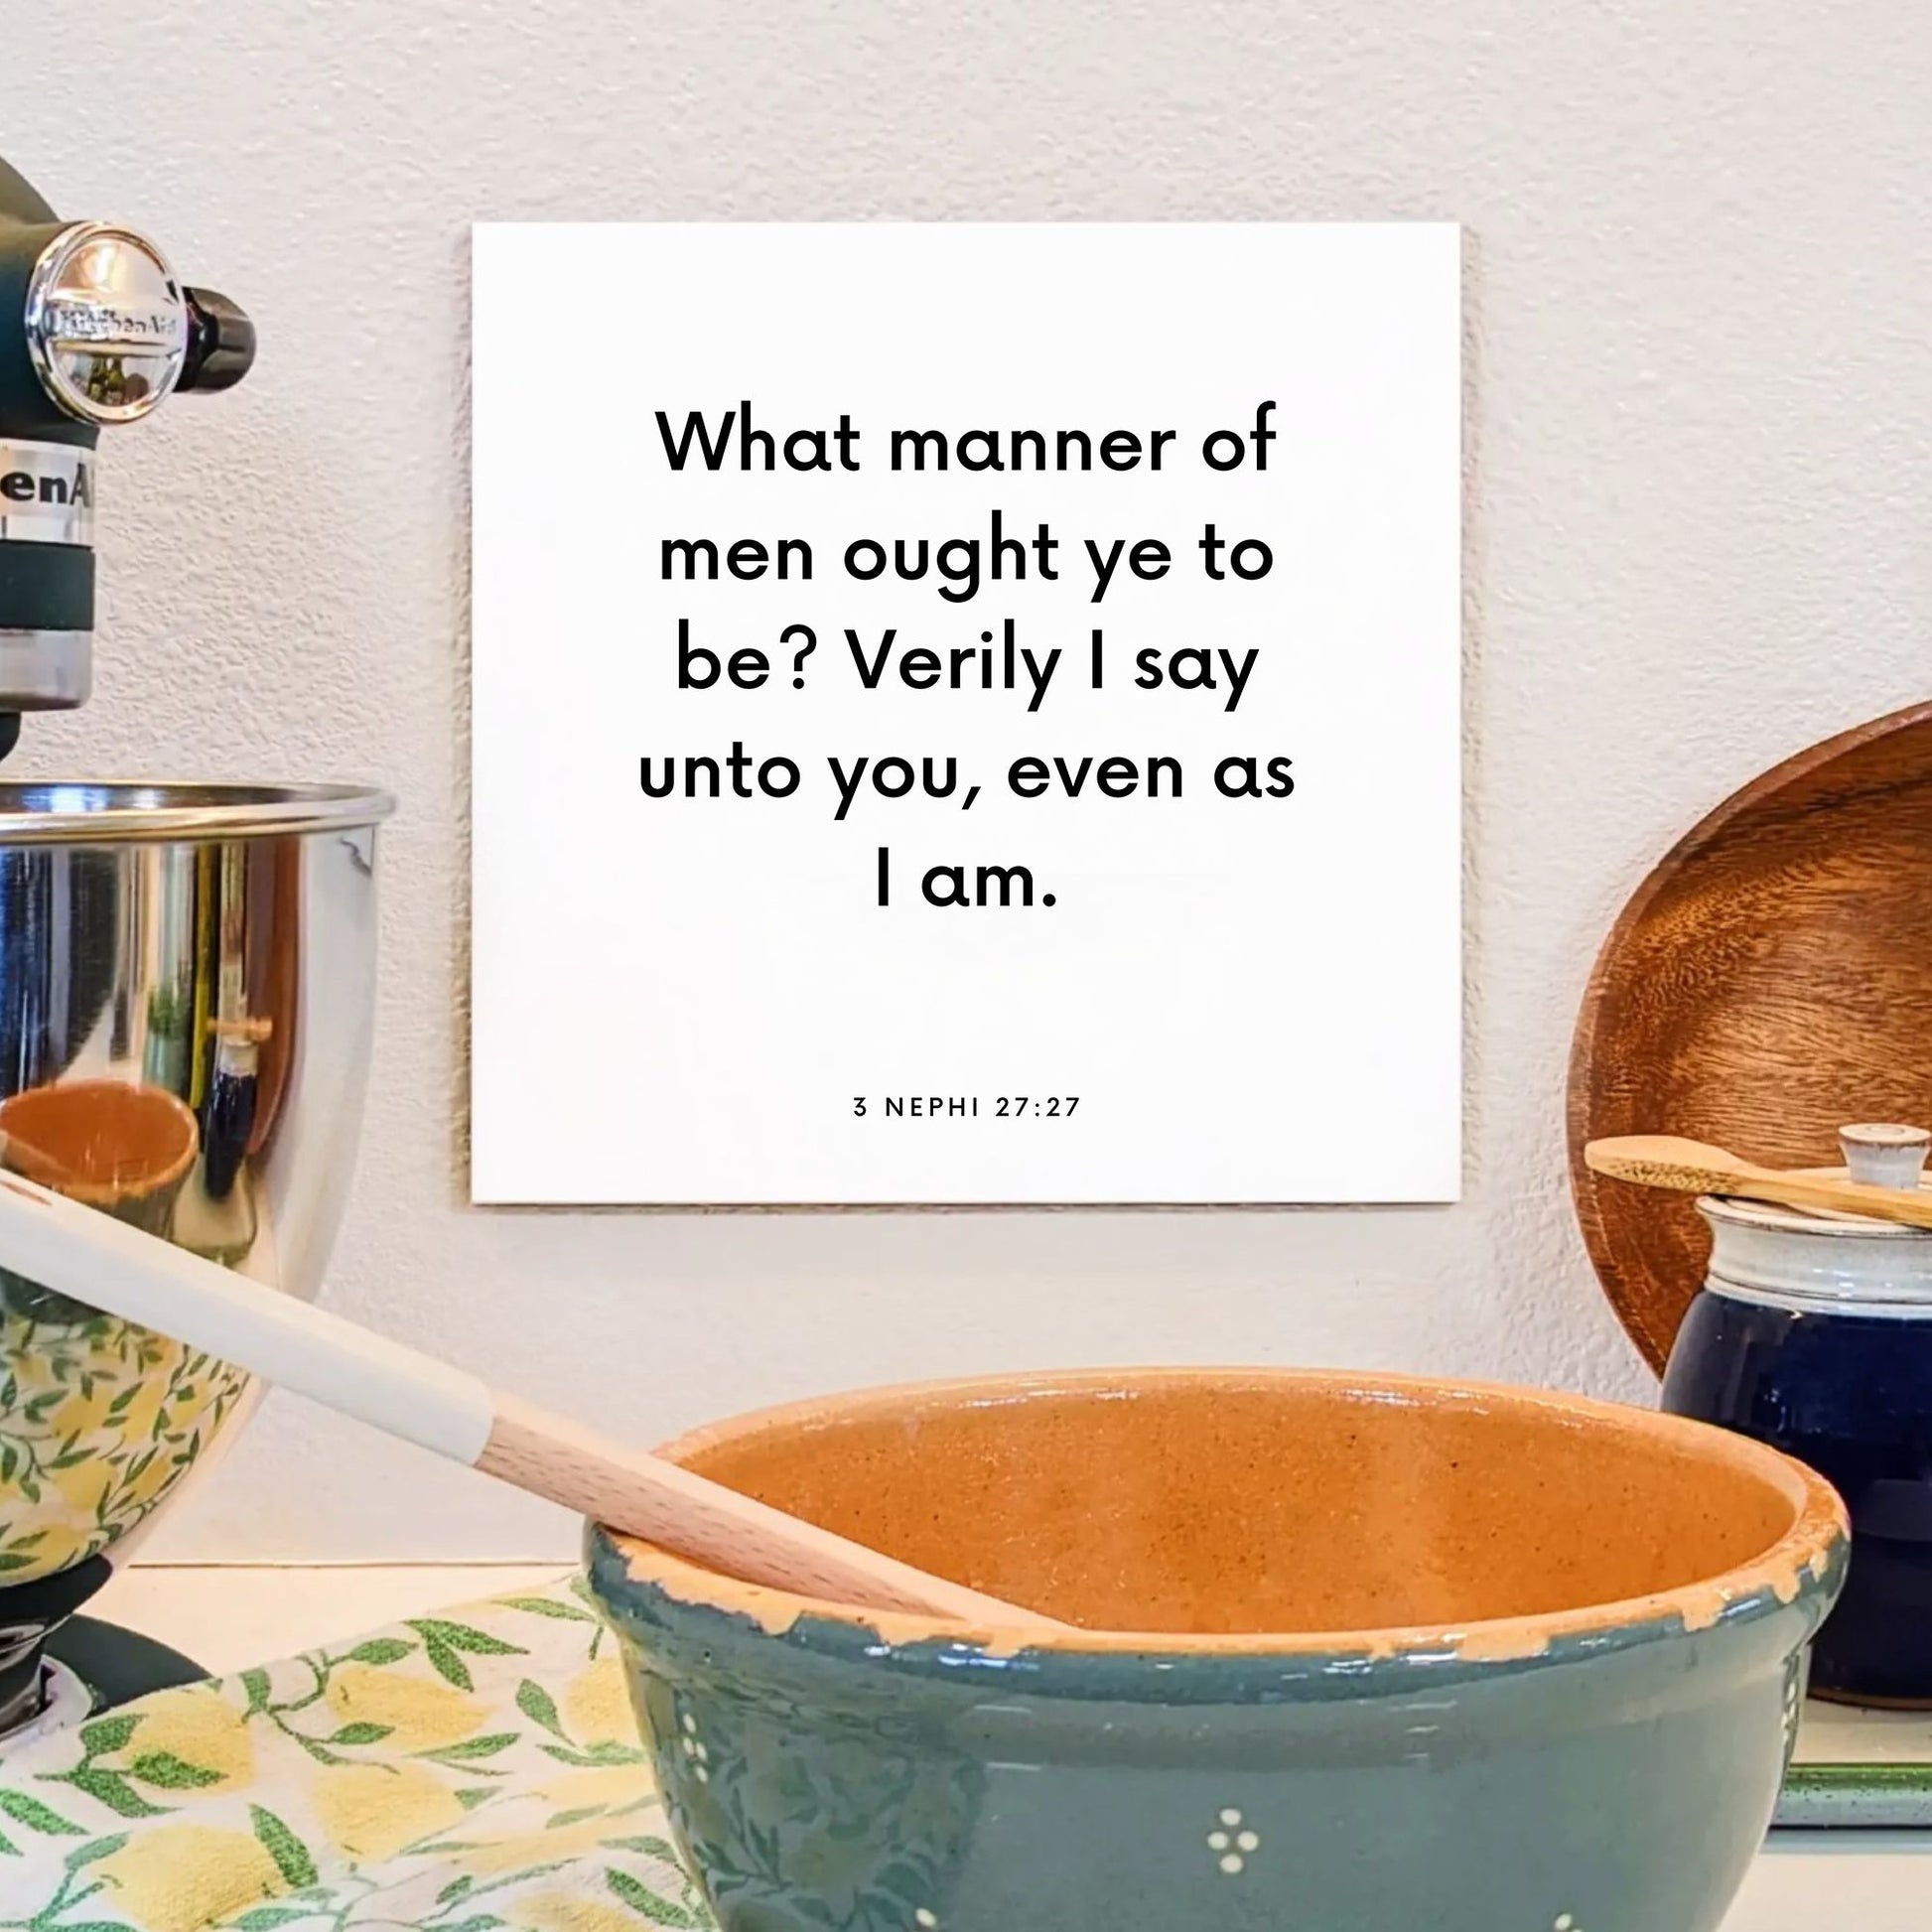 Kitchen mouting of the scripture tile for 3 Nephi 27:27 - "What manner of men ought ye to be?"